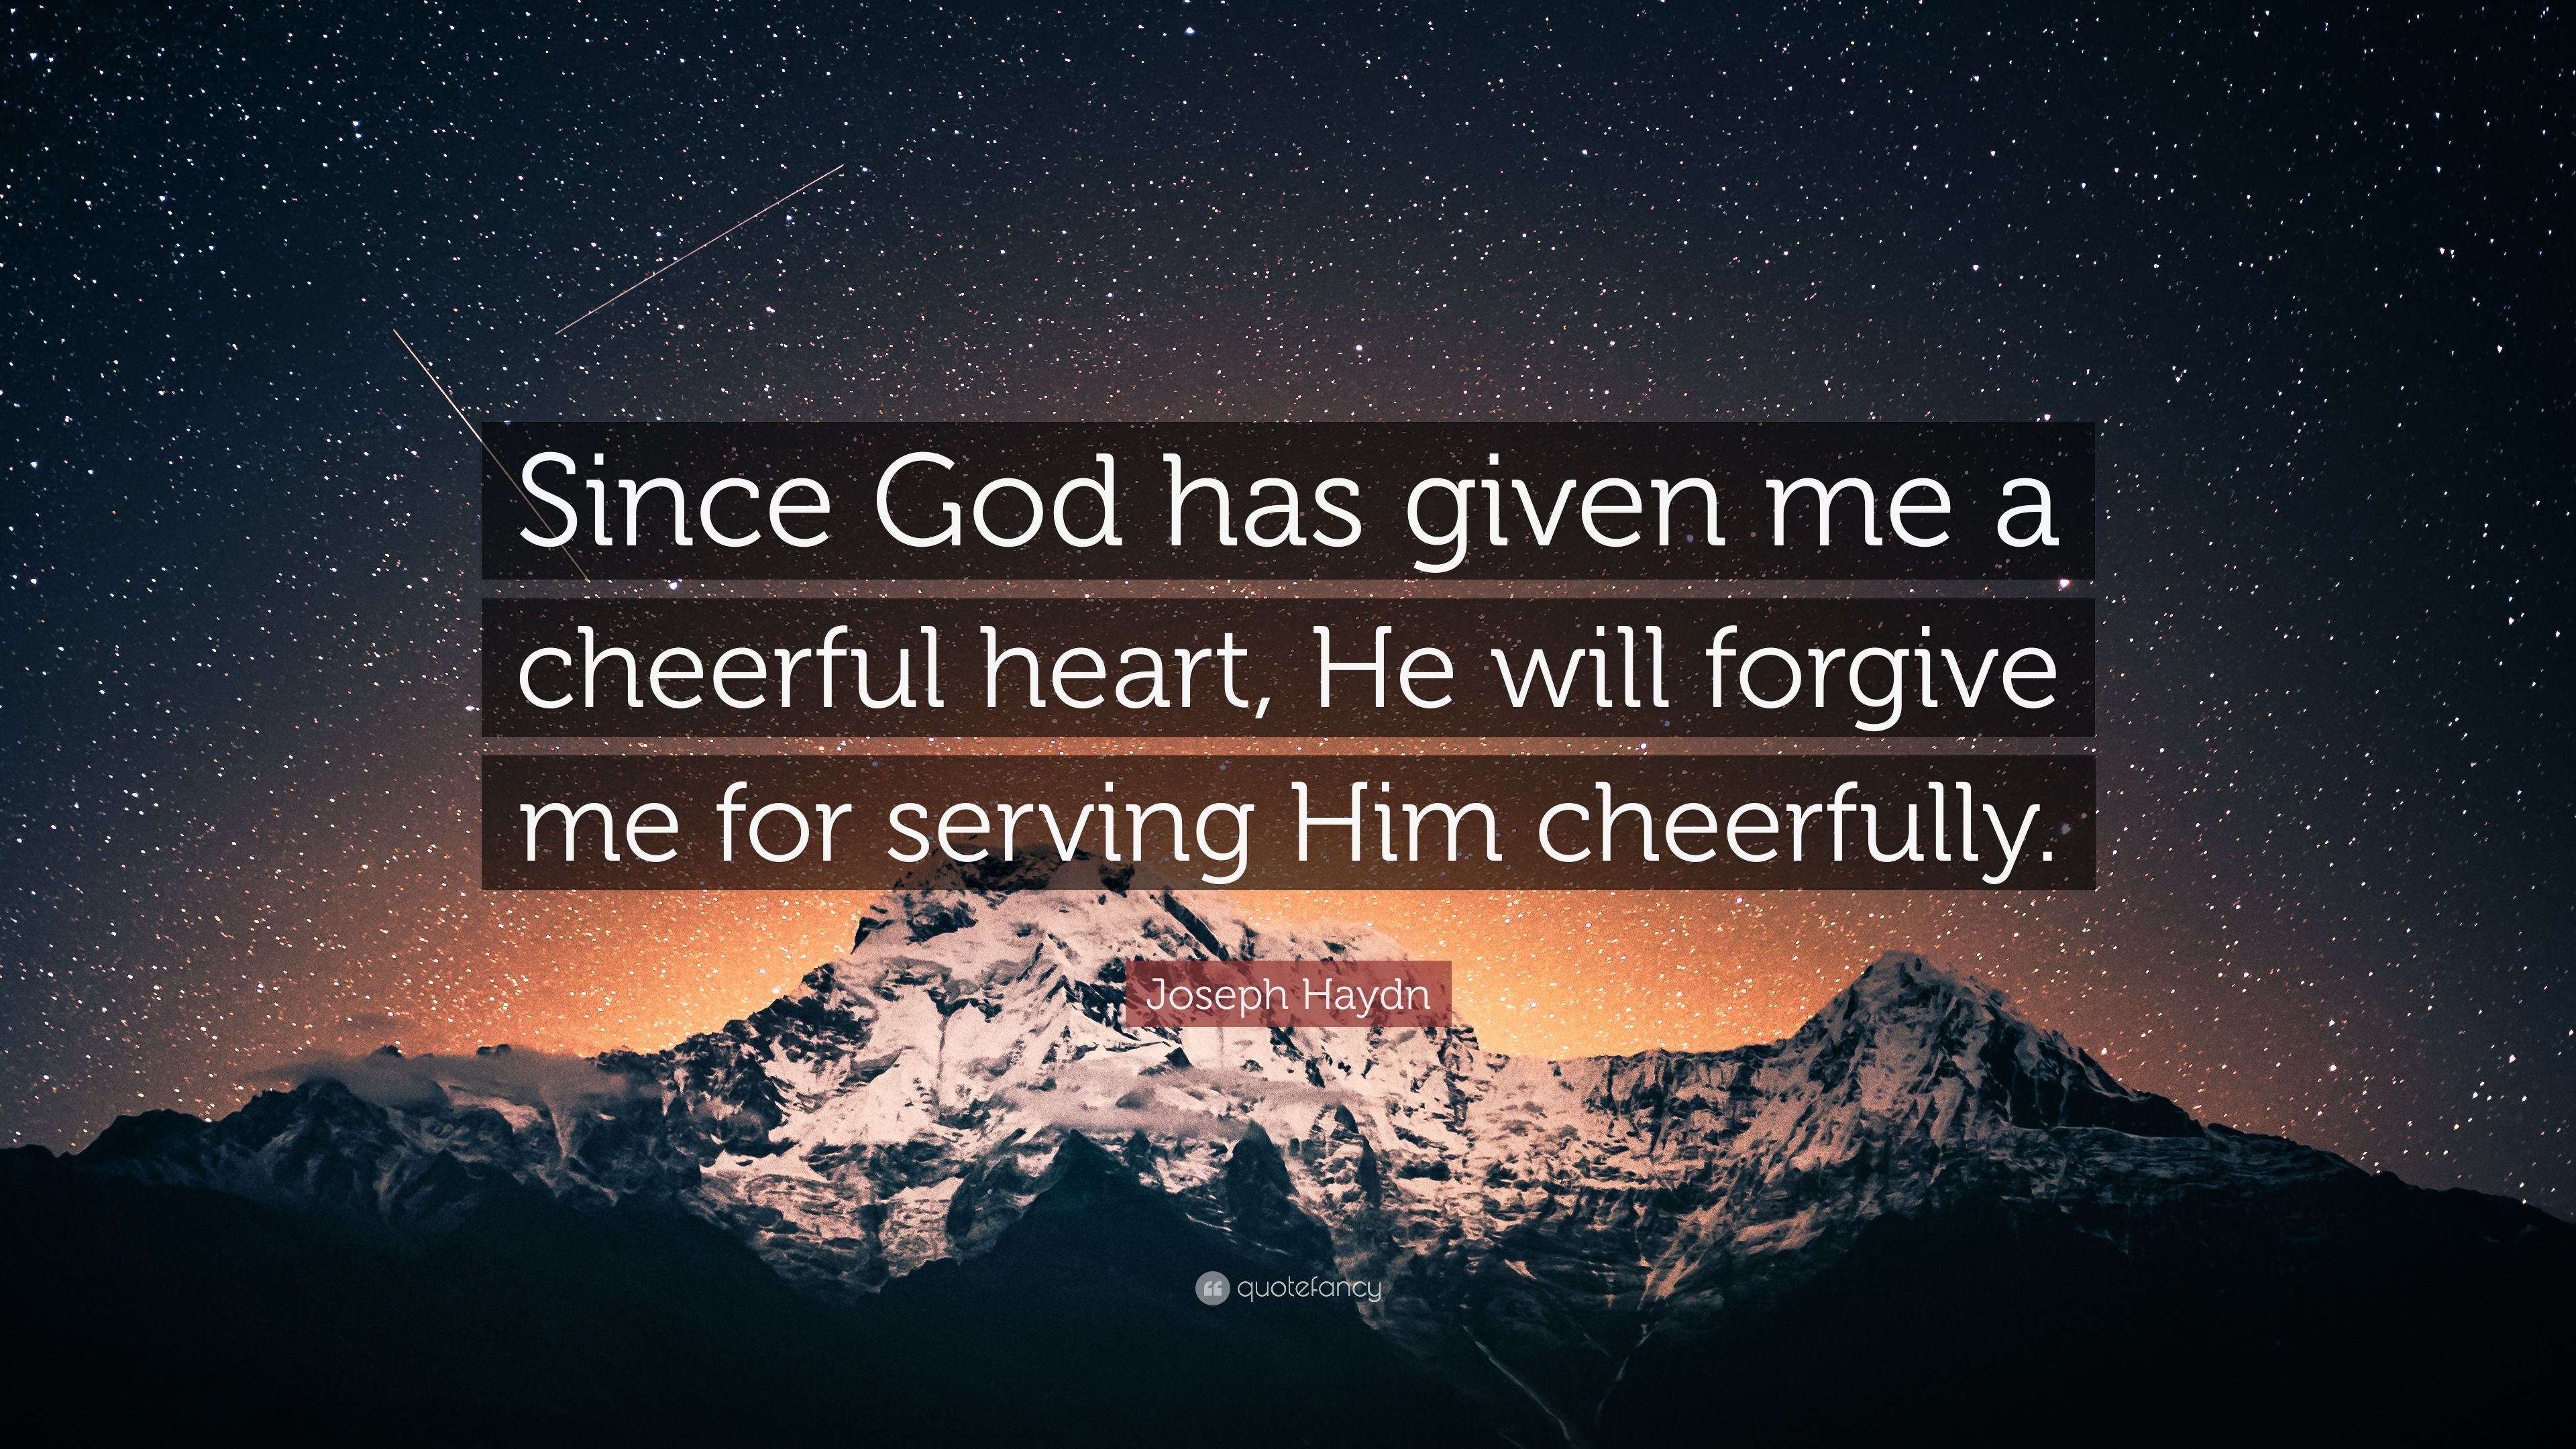 Joseph Haydn Quote: “Since God has given me a cheerful heart, He will forgive me for serving Him cheerfully.” (7 wallpaper)